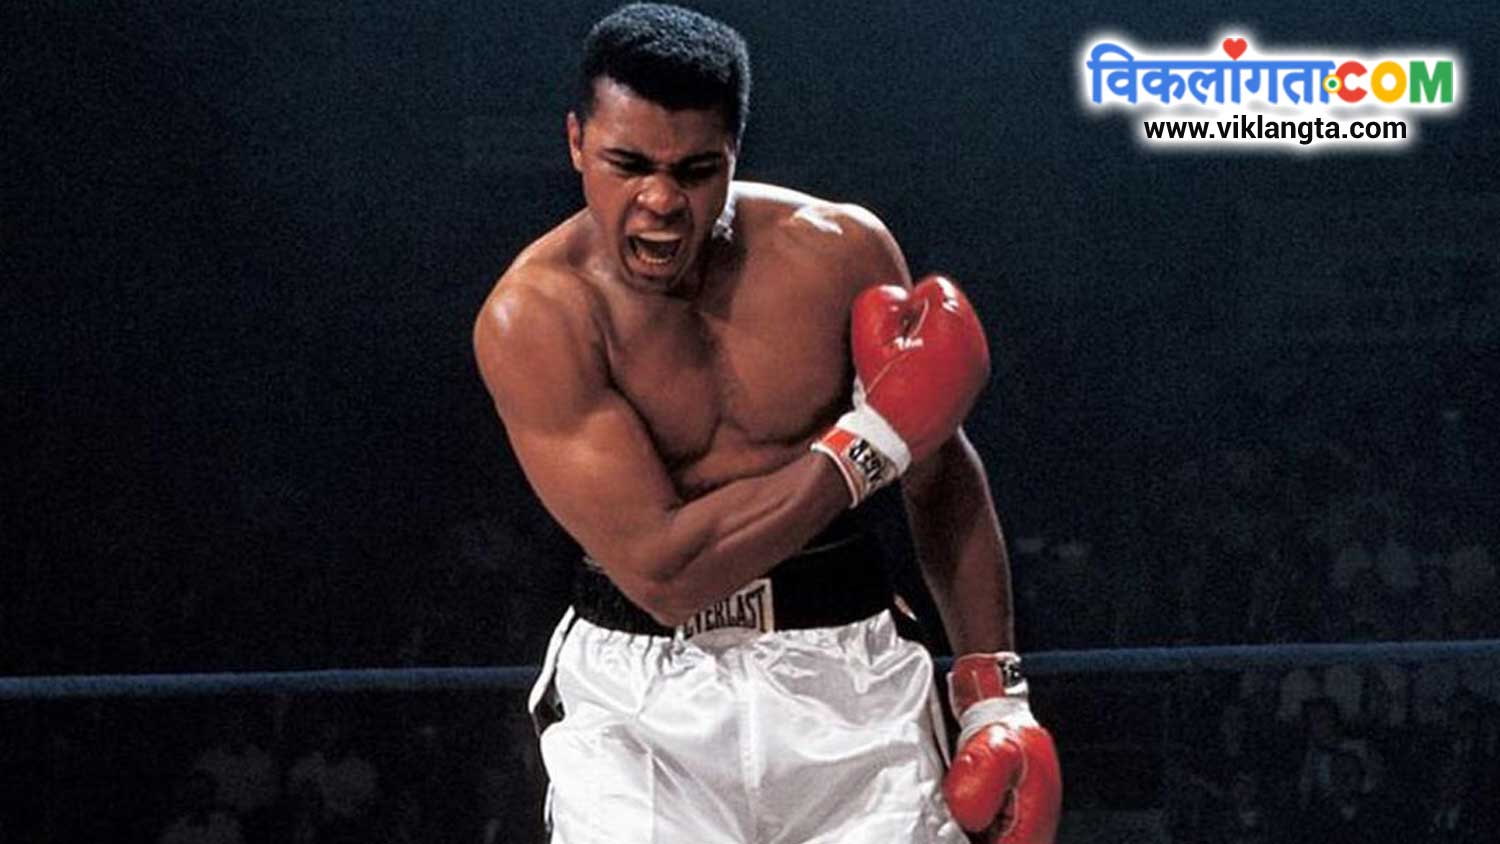 famous disabled person in the world Mohd Ali